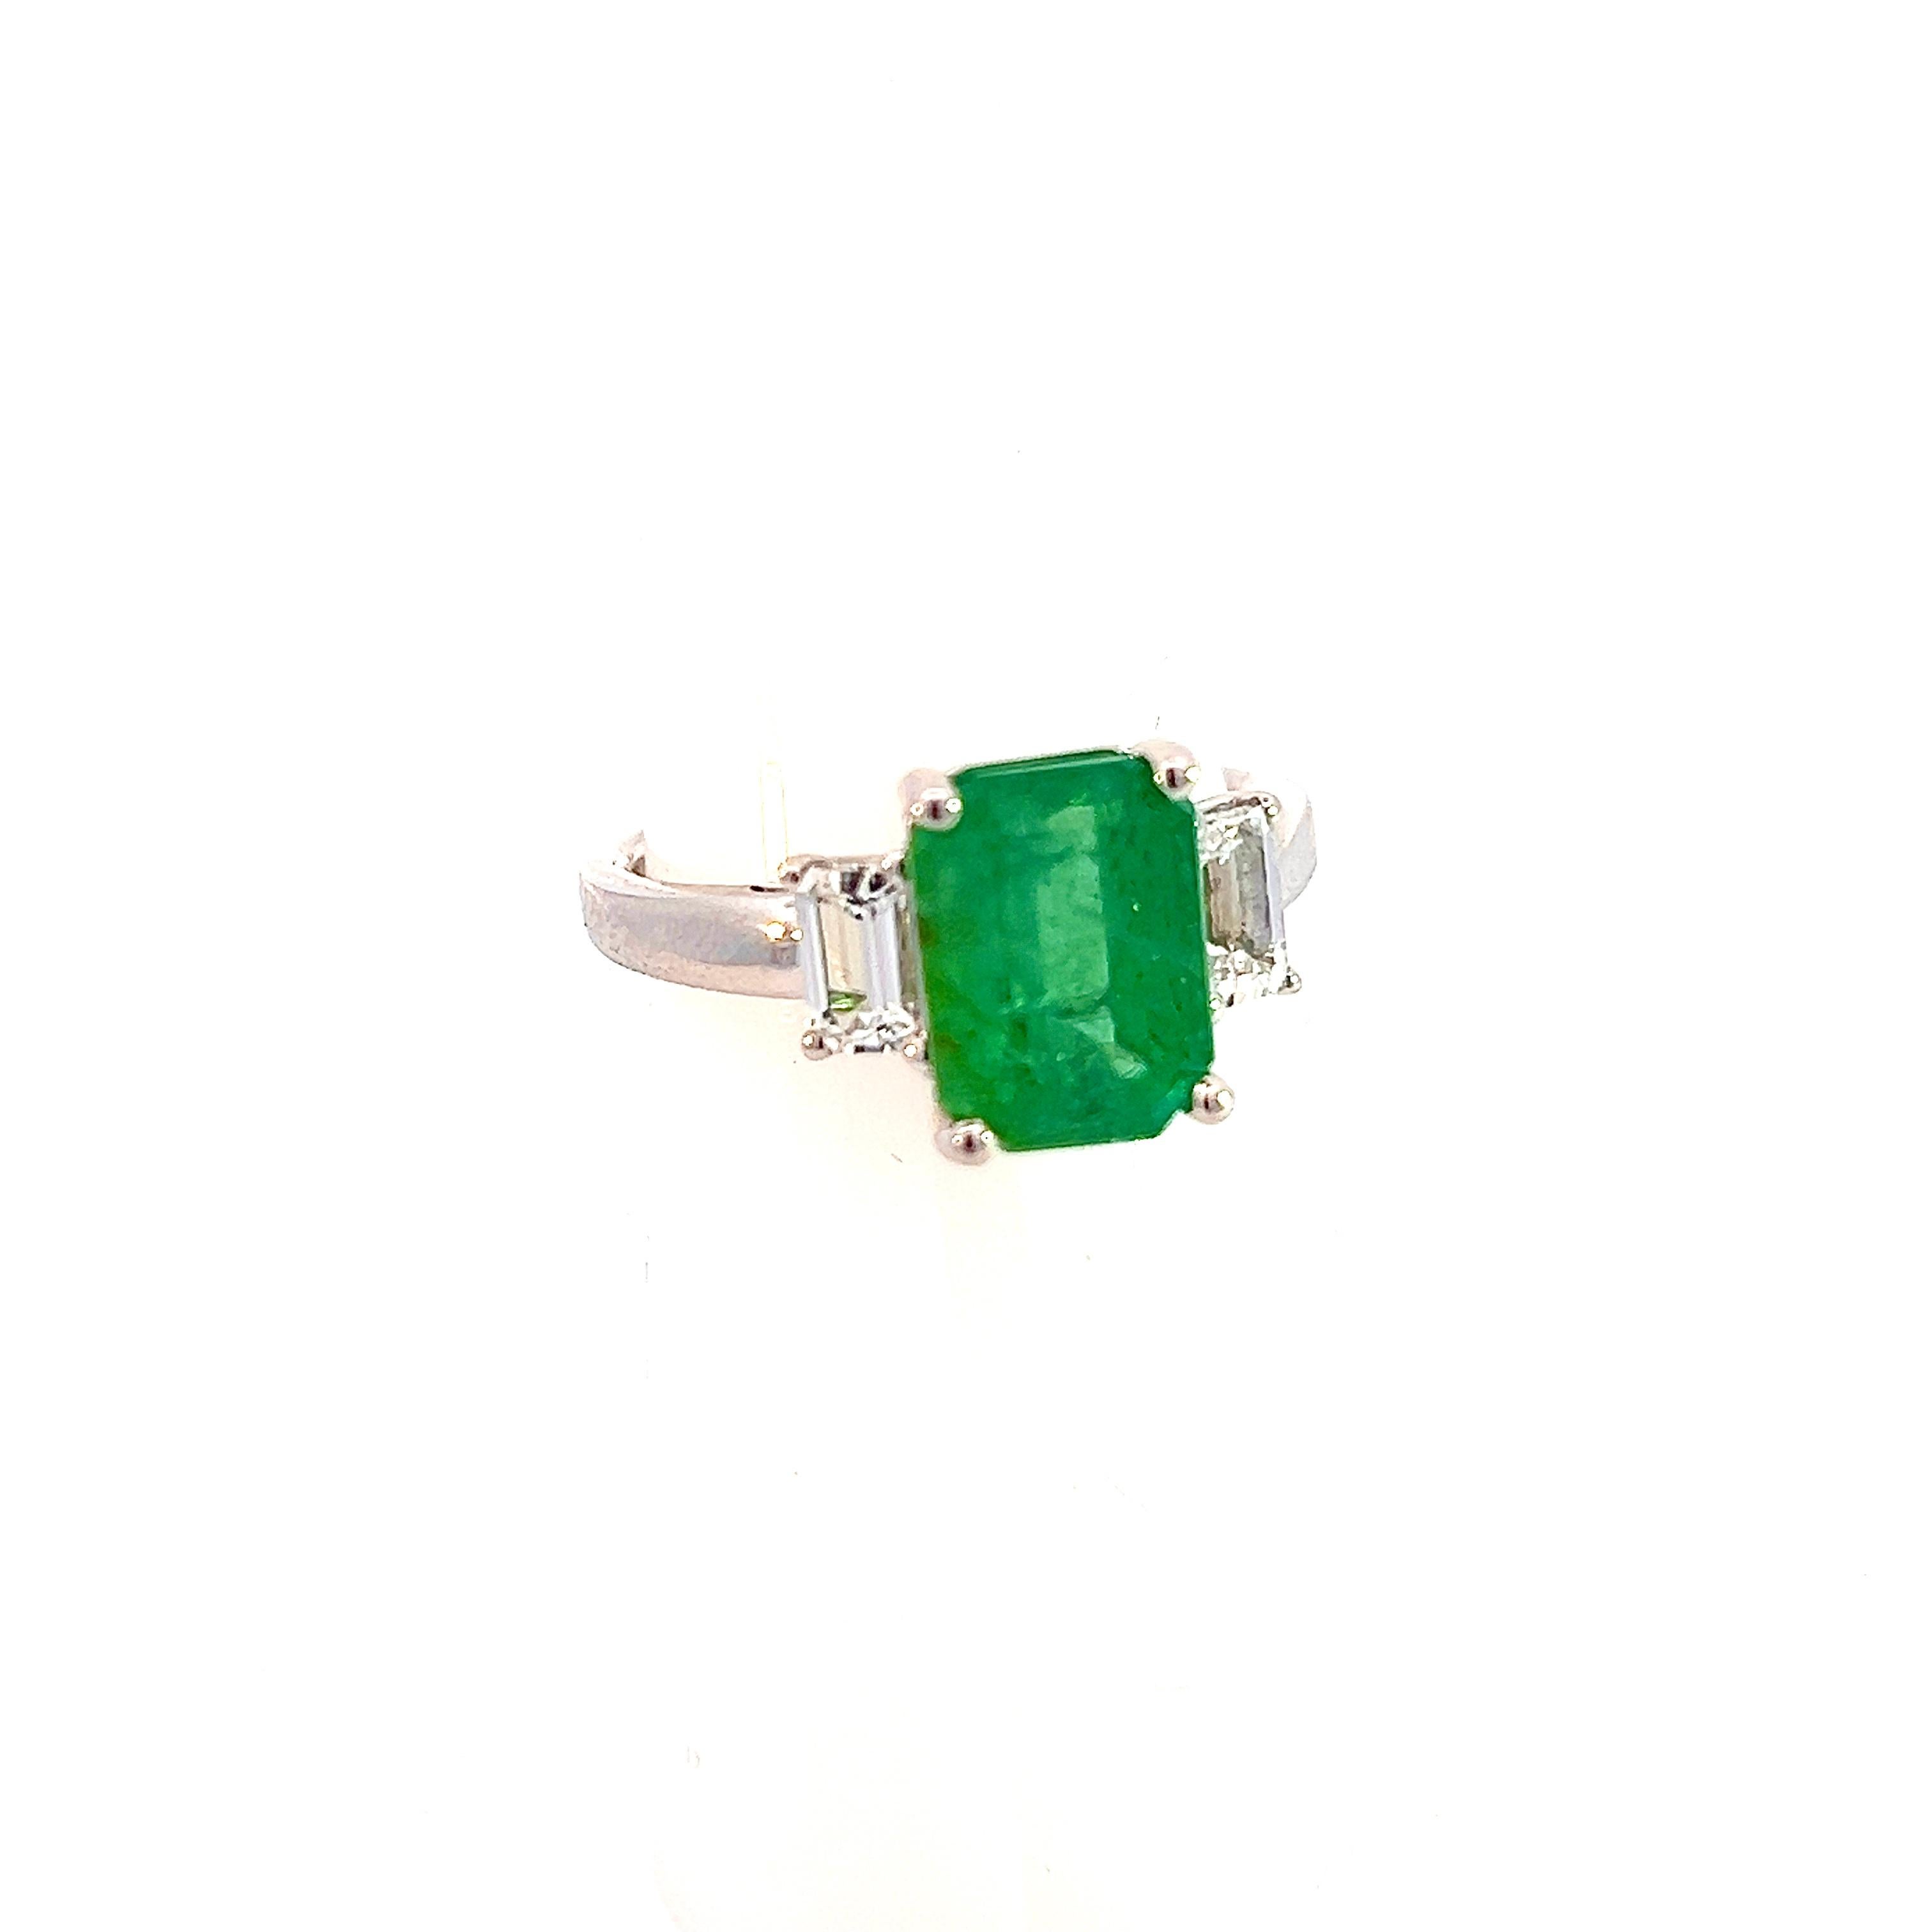 Natural Emerald Sapphire Ring 6.25 14k White Gold 3.49 TCW Certified  For Sale 7